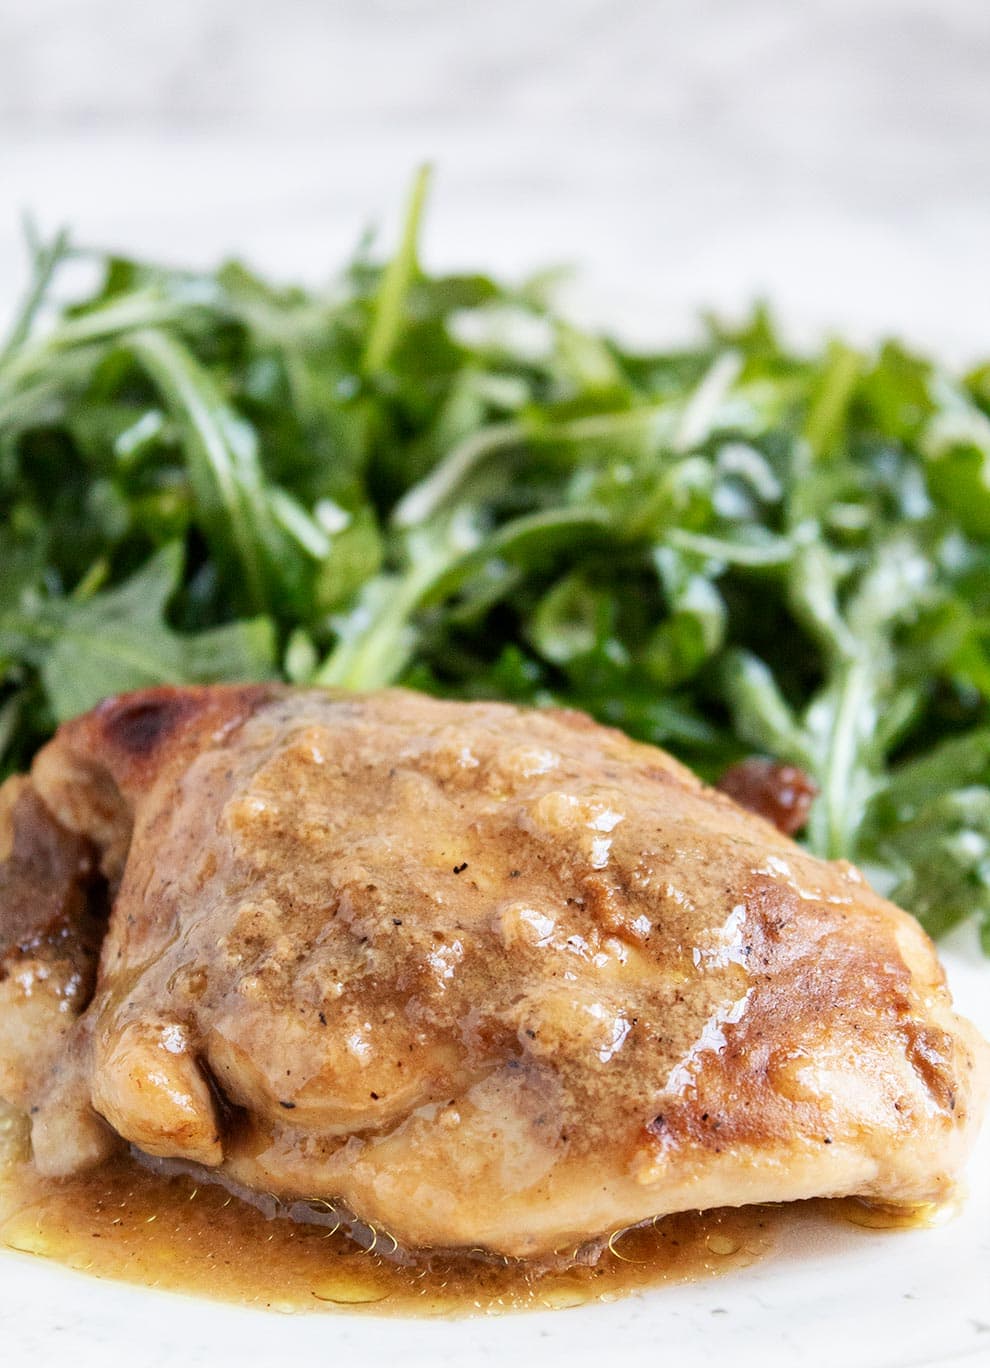 keto chicken thighs in front of a pile of seasoned arugula